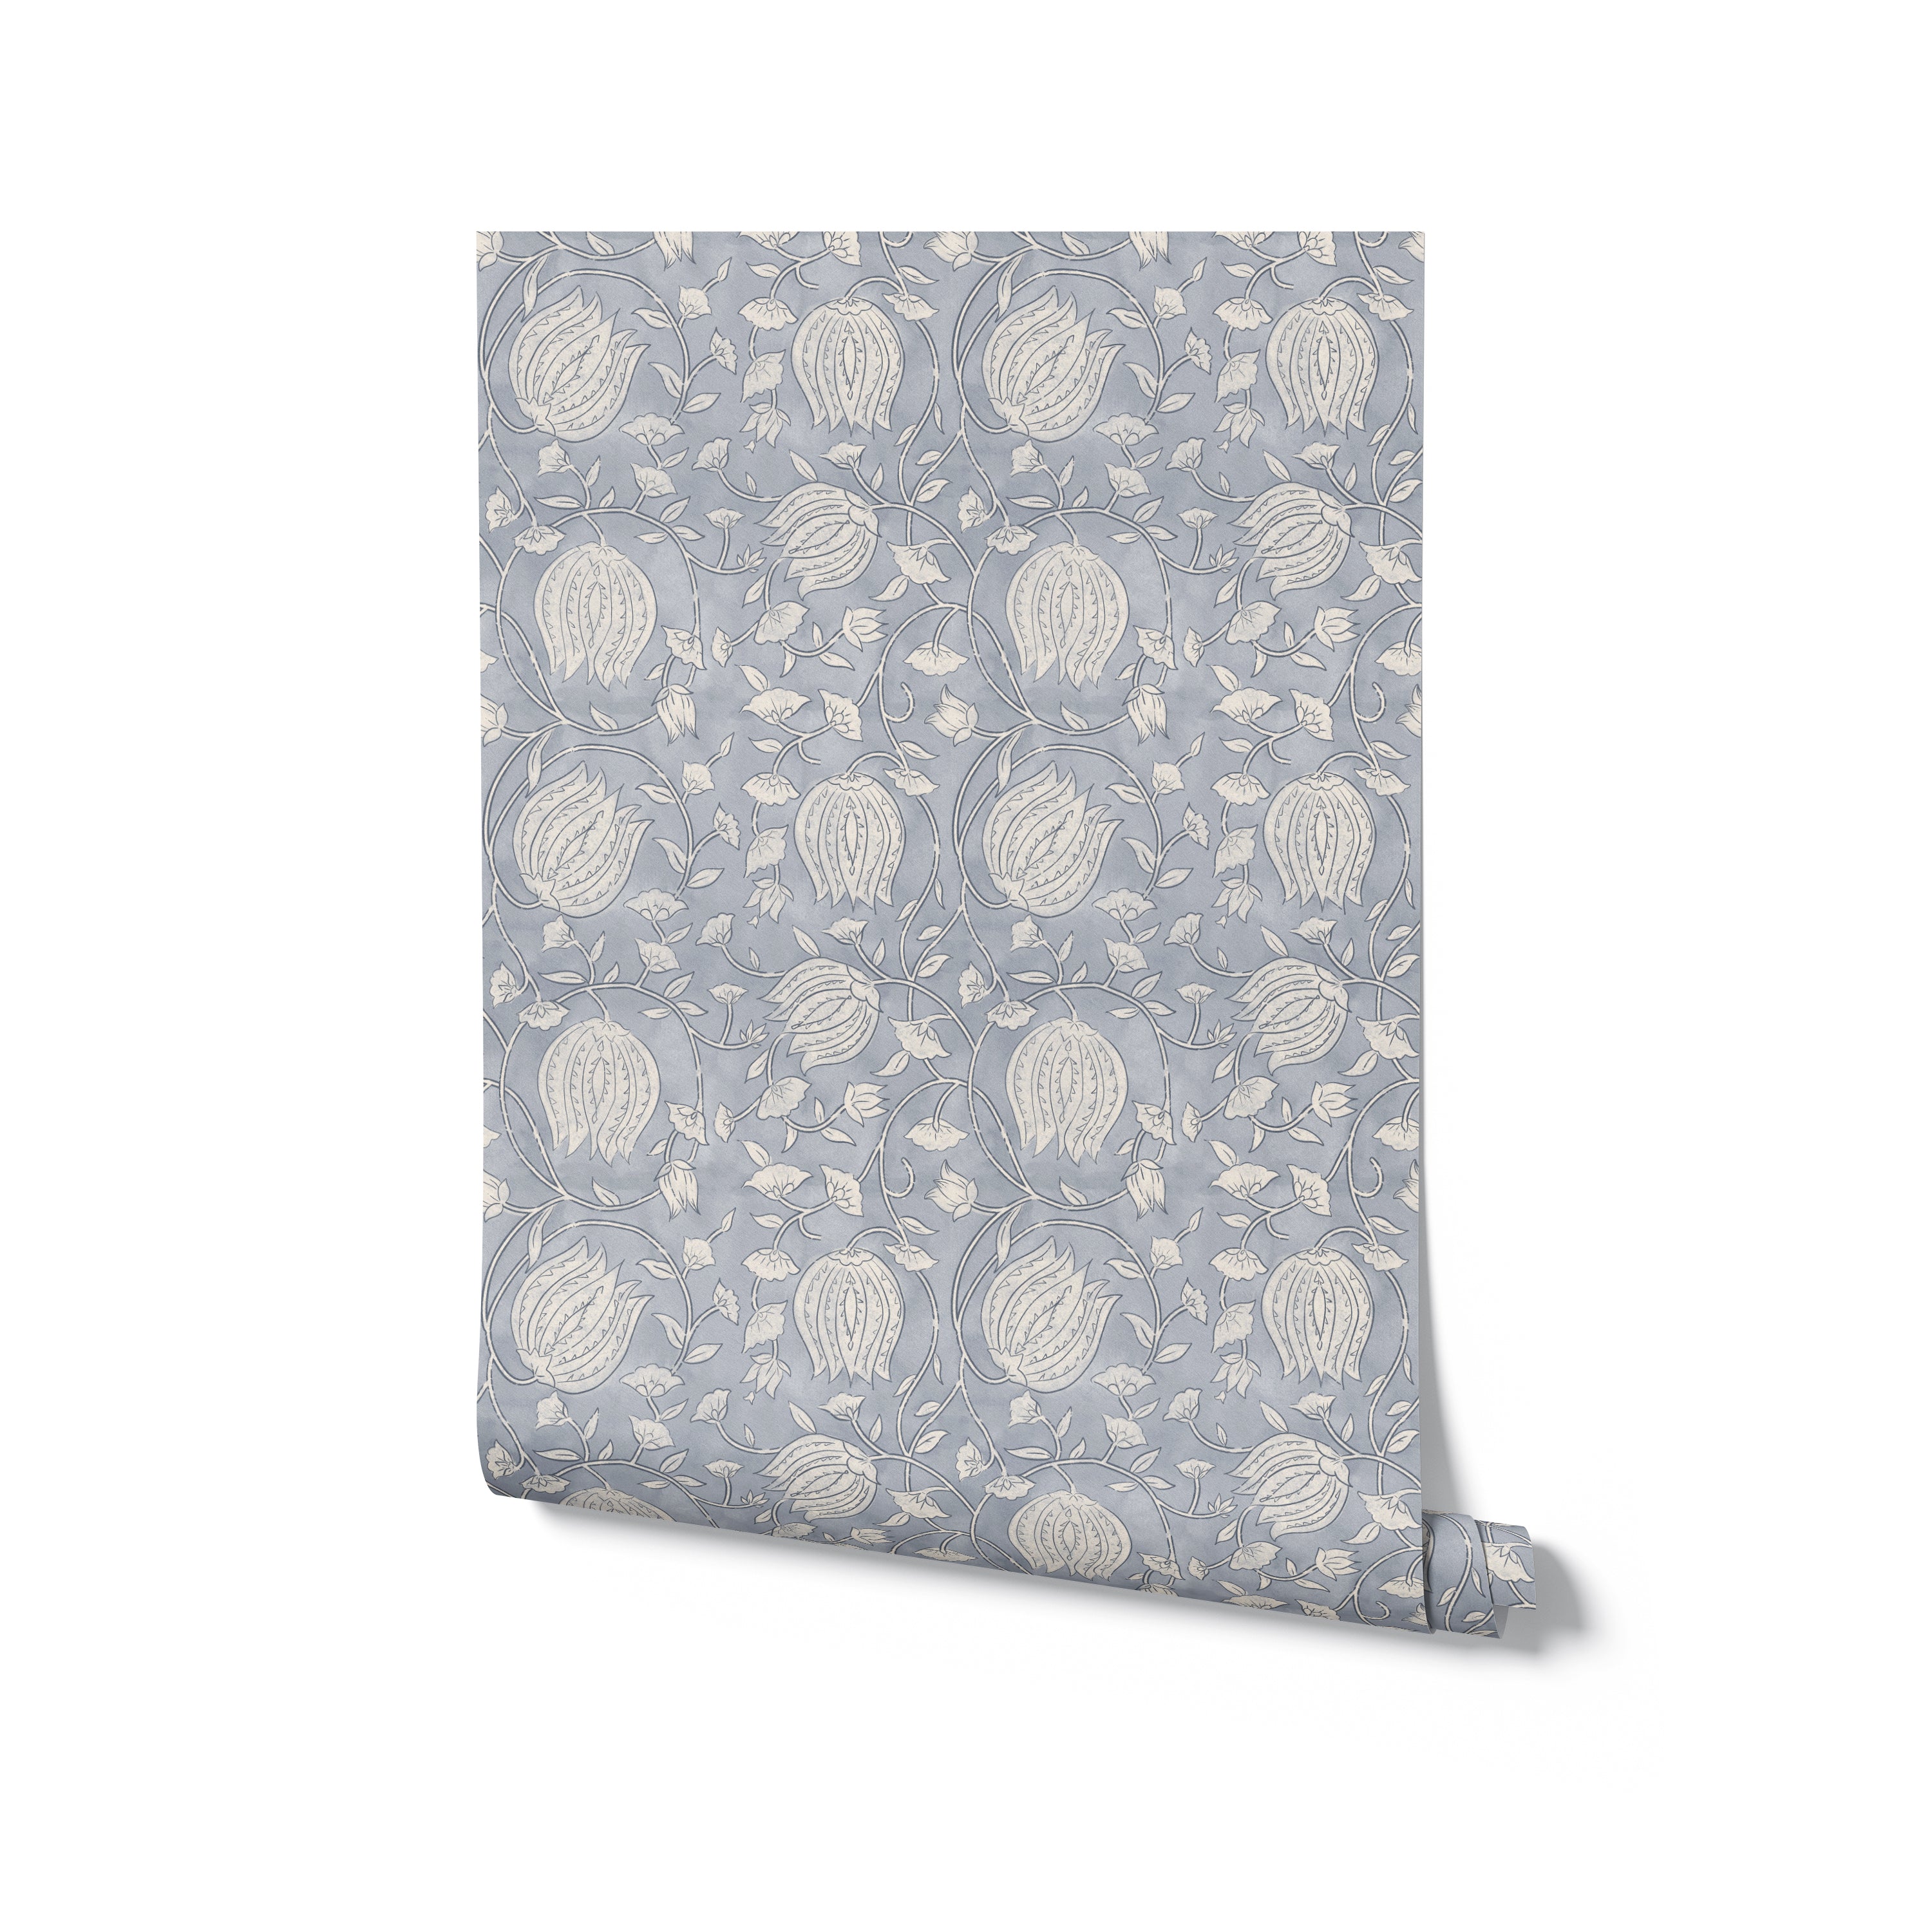 A roll of Cornflower Wallpaper displayed against a plain background, highlighting the intricate pattern of blue and gray flowers and foliage that gives a classic and timeless look to the design.